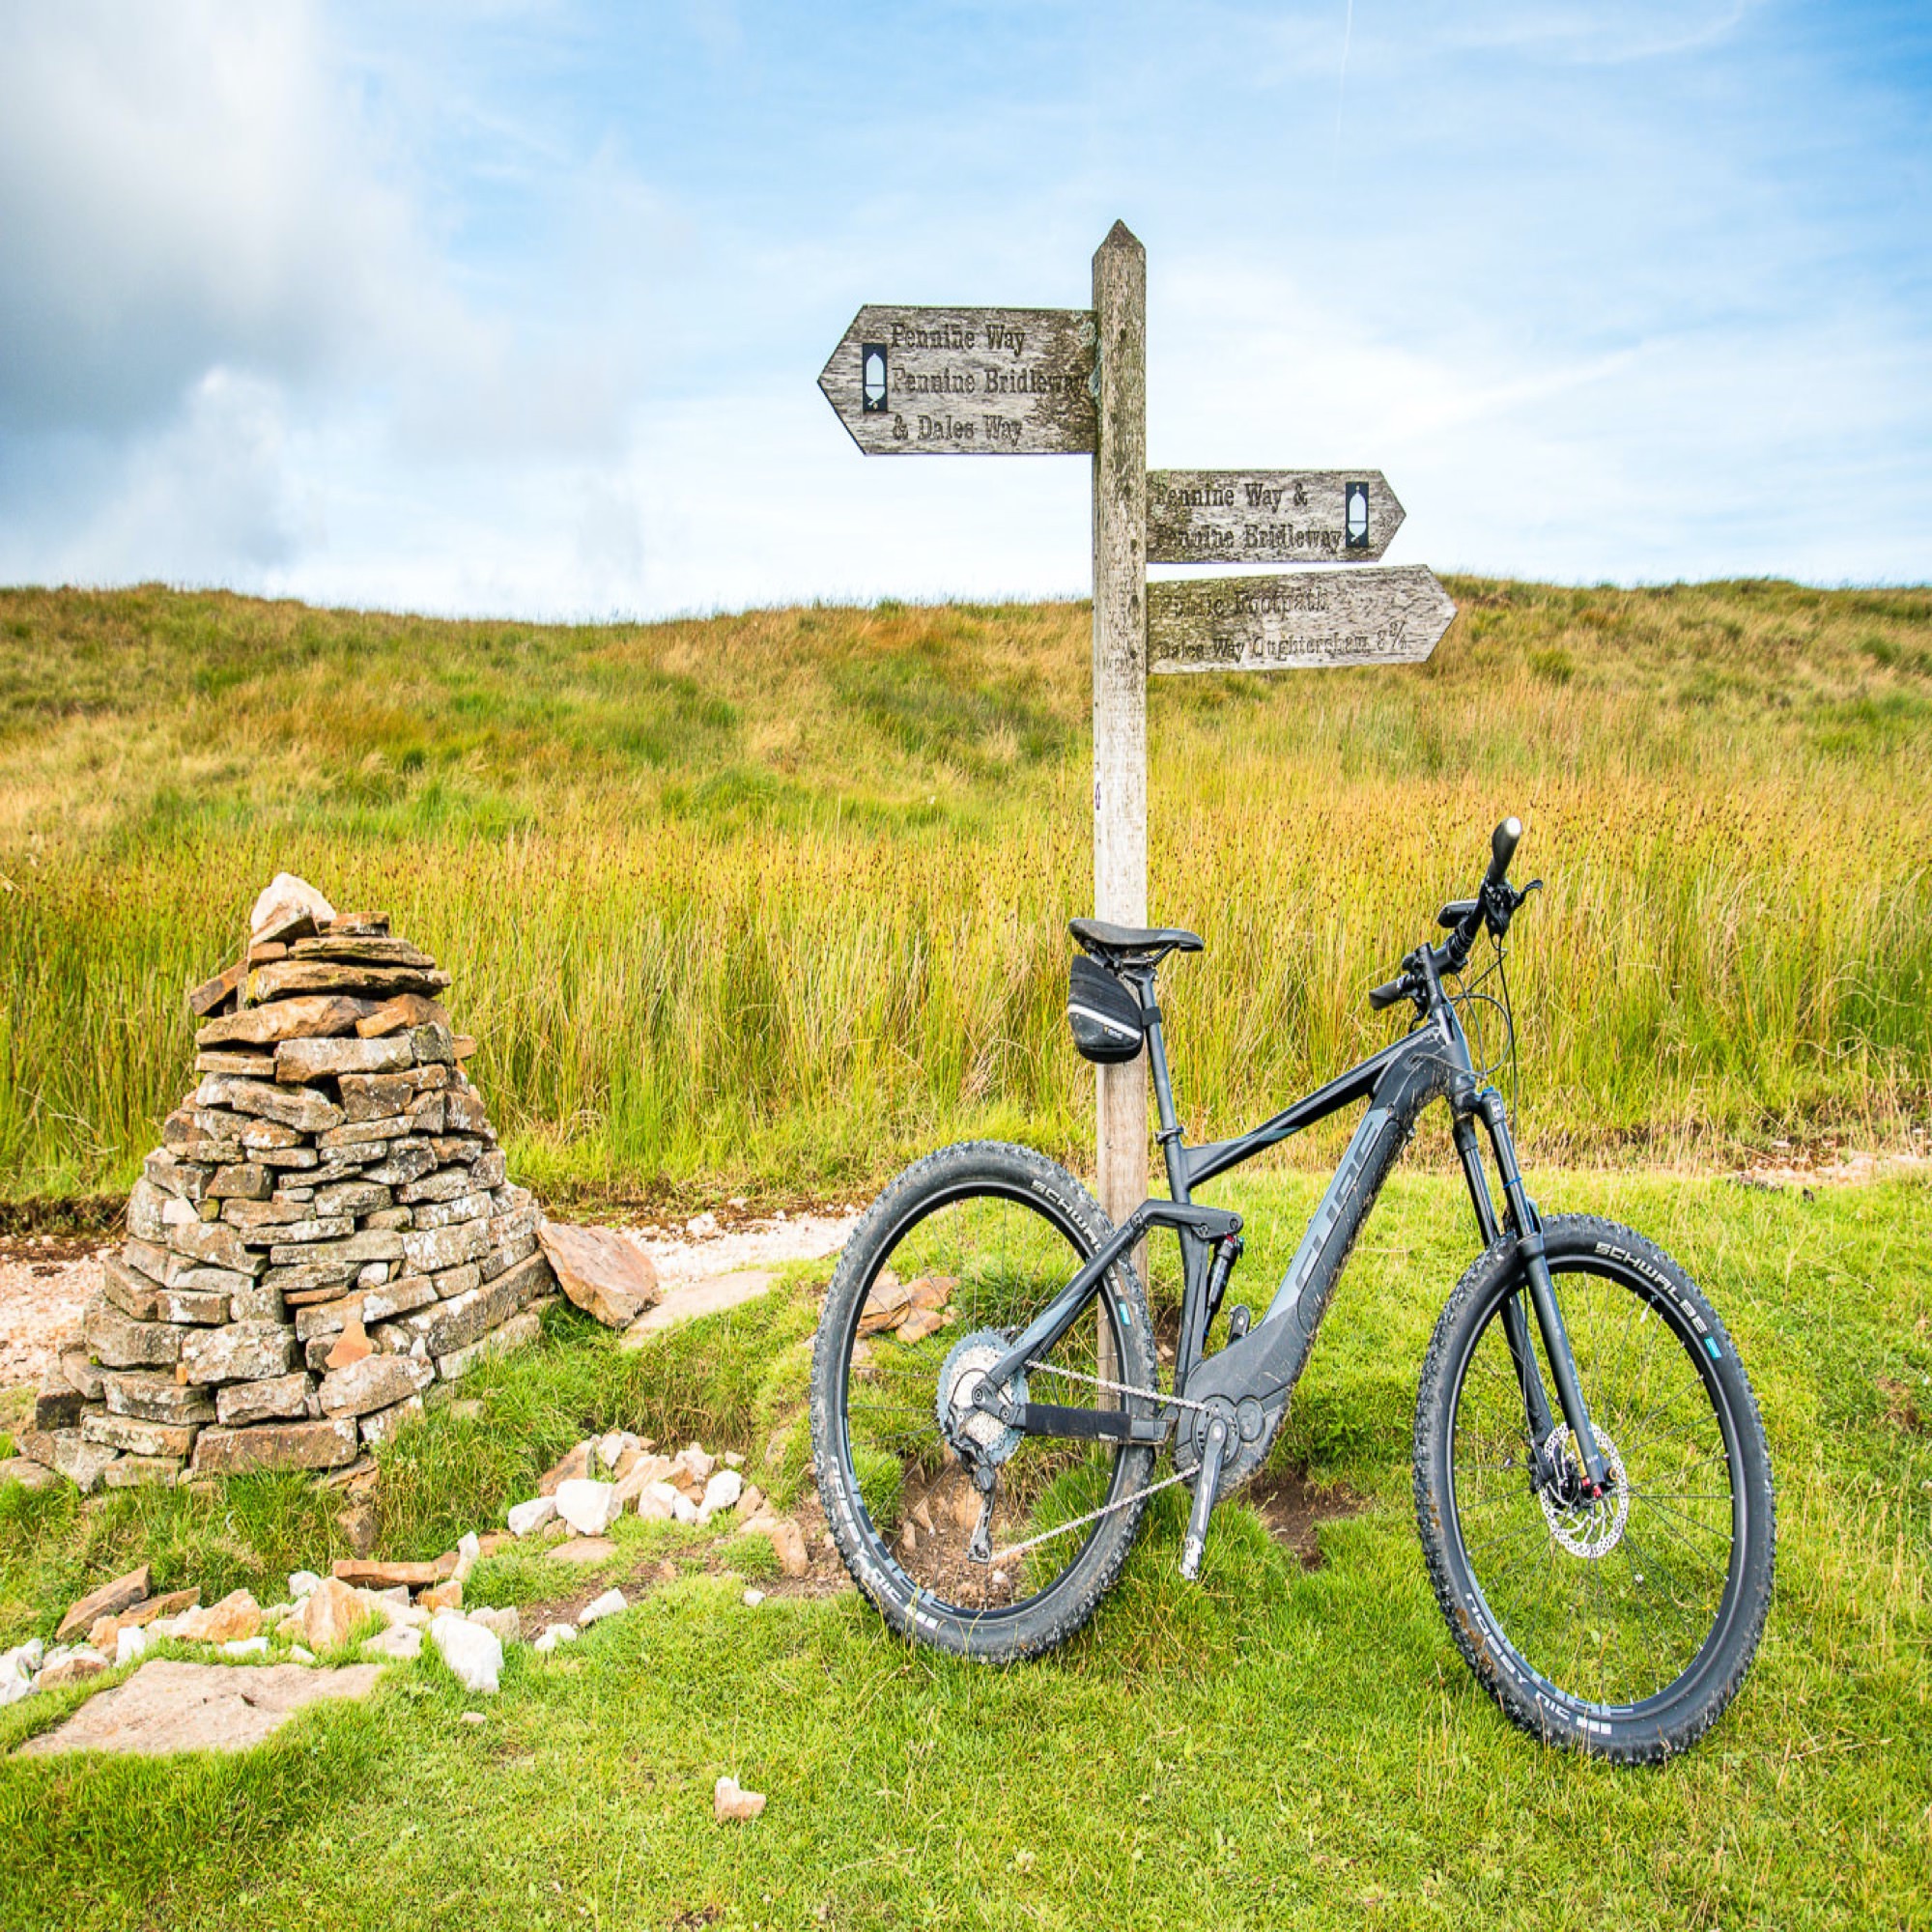 Cube Stereo Hybrid Pro at a cairn on Cam High Road during our Pennine Bridleway ride.